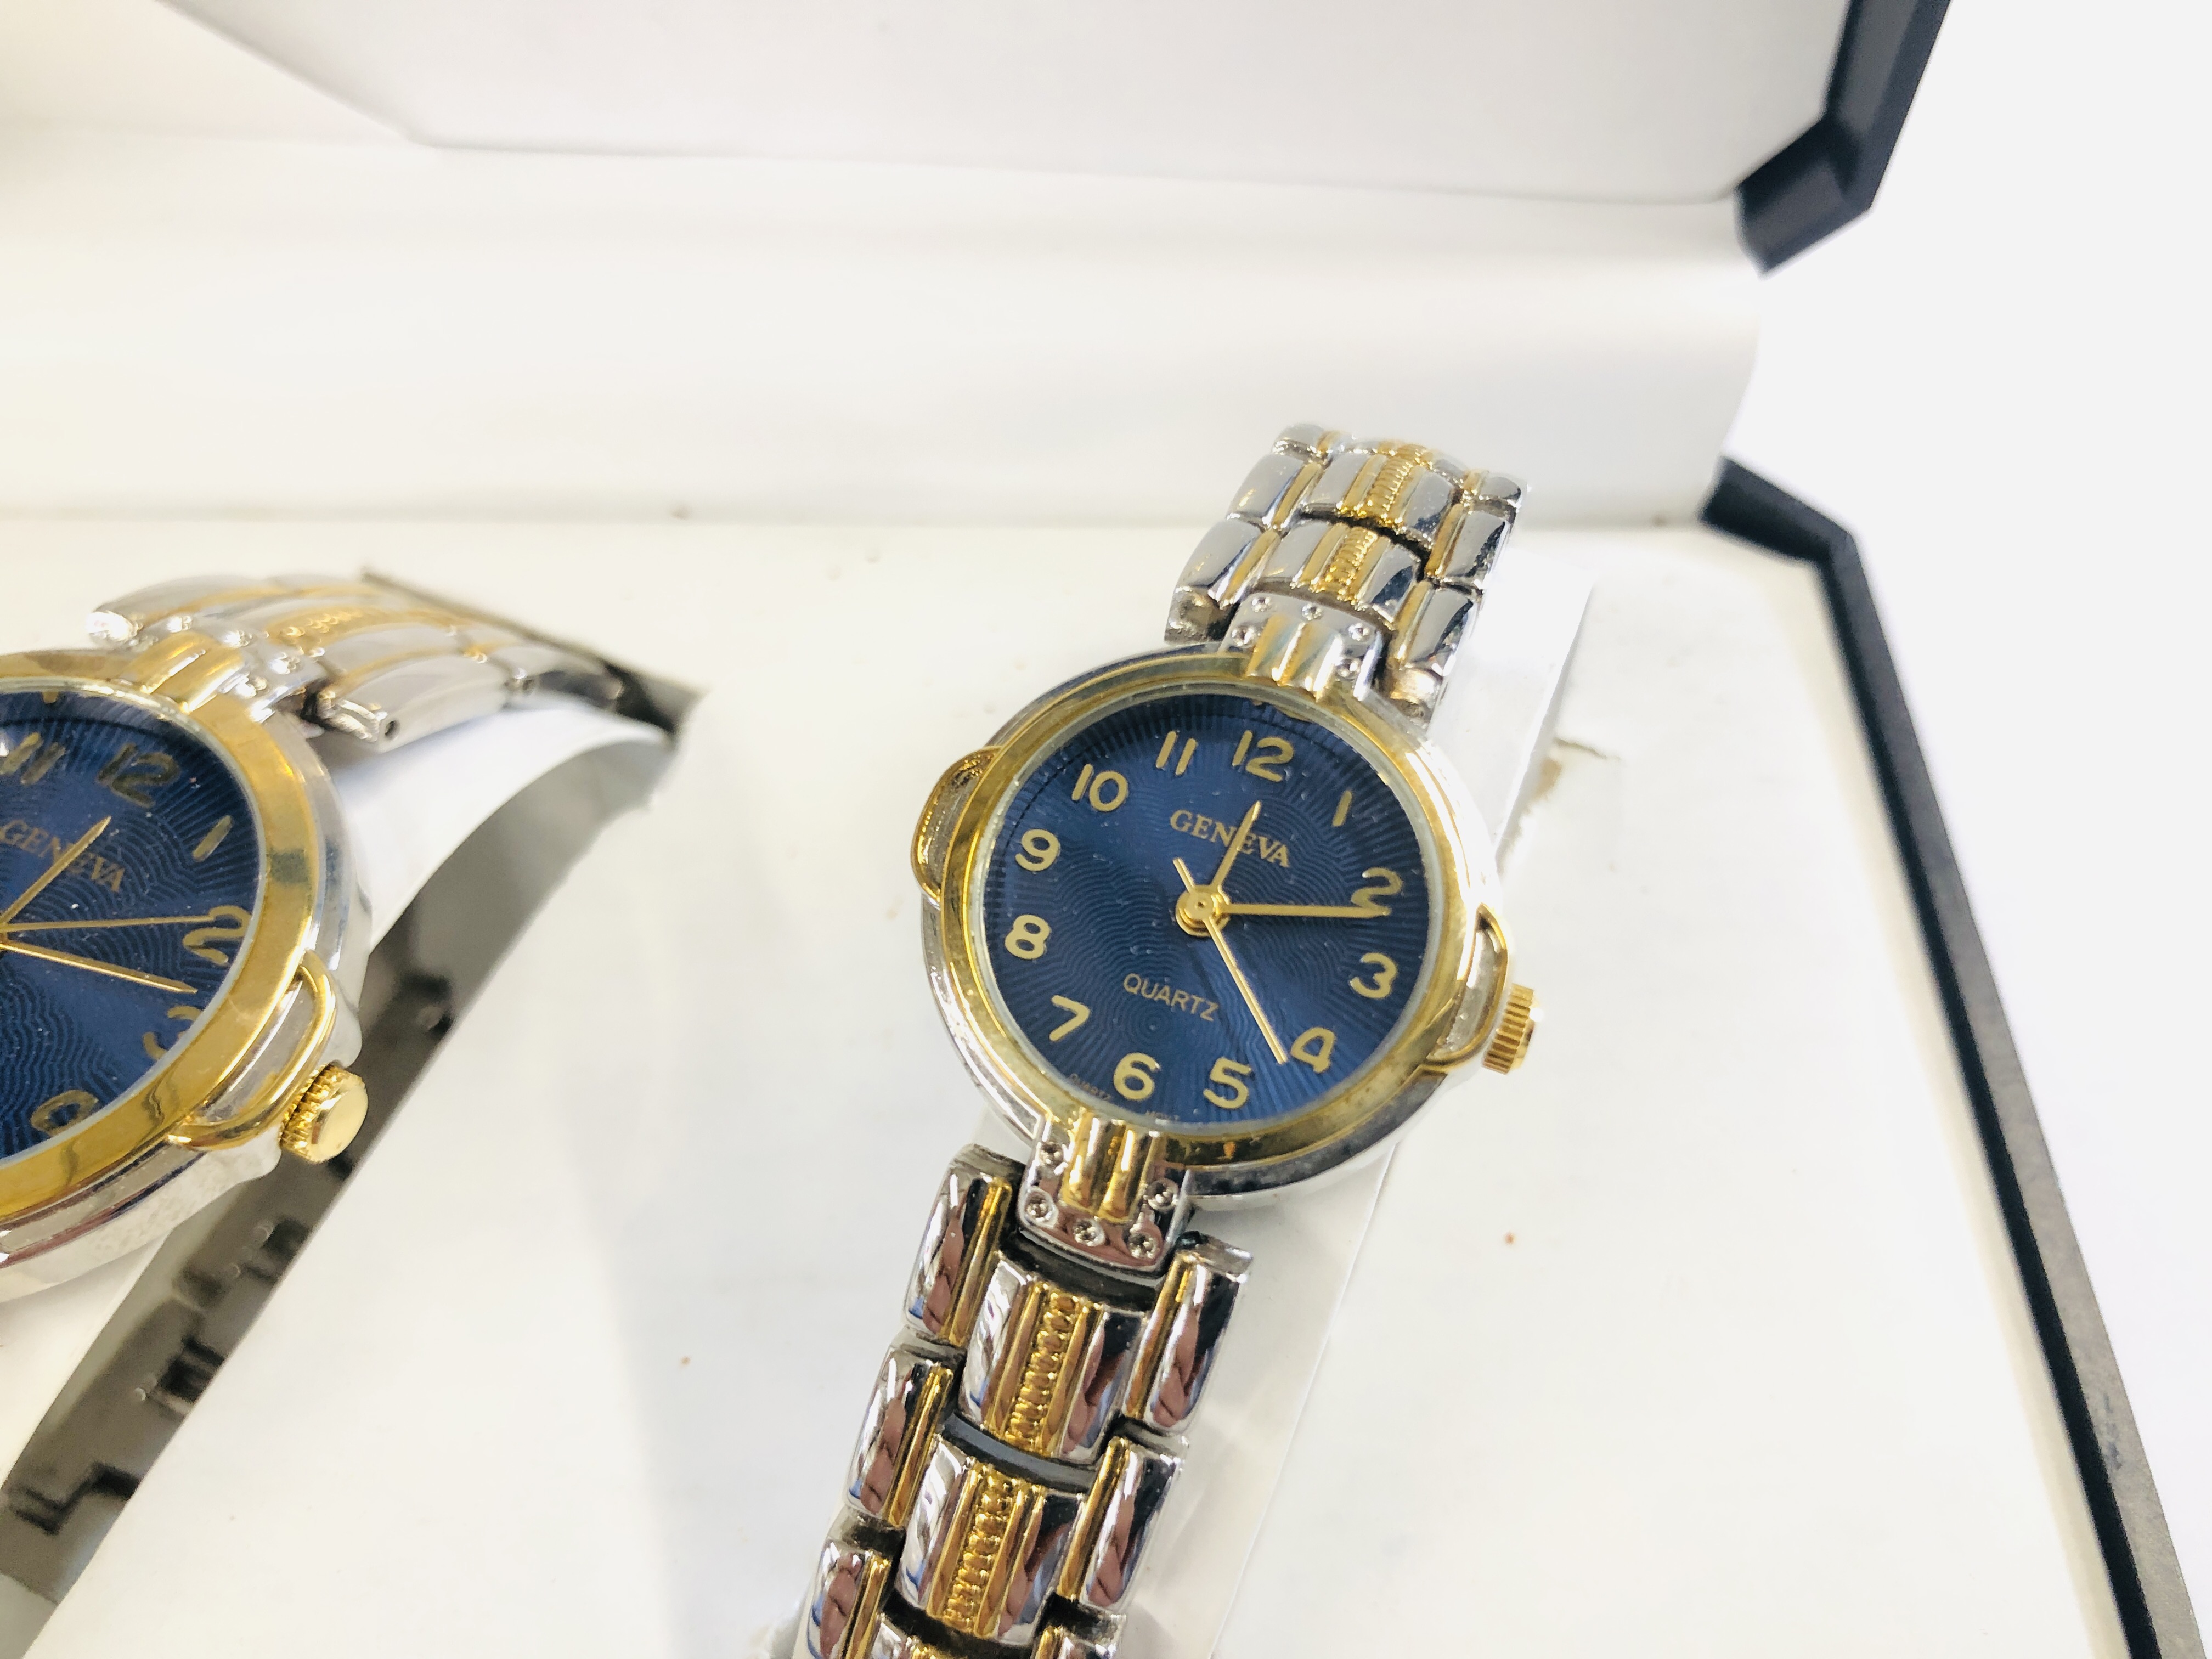 A BOXED "GENEVA" QUARTZ WATCH HIS AND HER SET. - Image 3 of 5